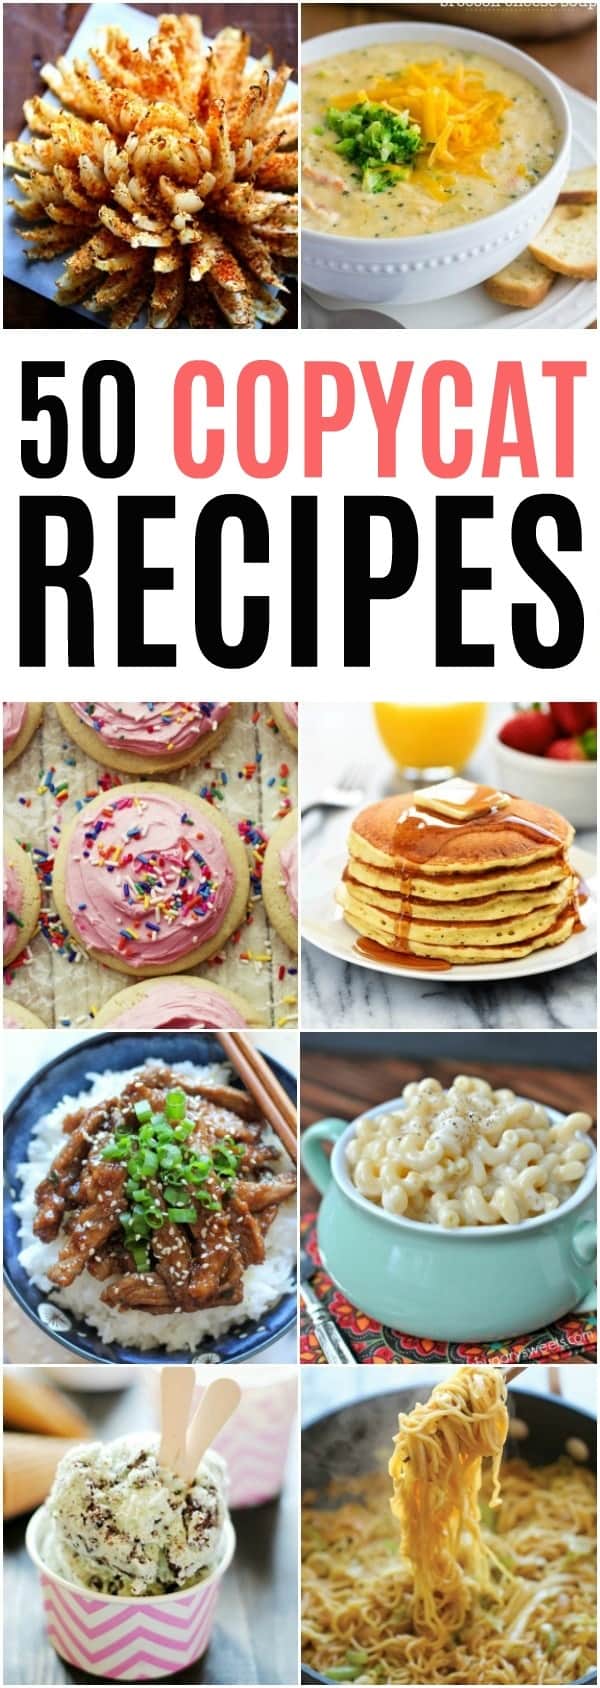 Bring home all your restaurant favorites with these 50 Copycat Recipes! I even like some of these copycats better than the original!